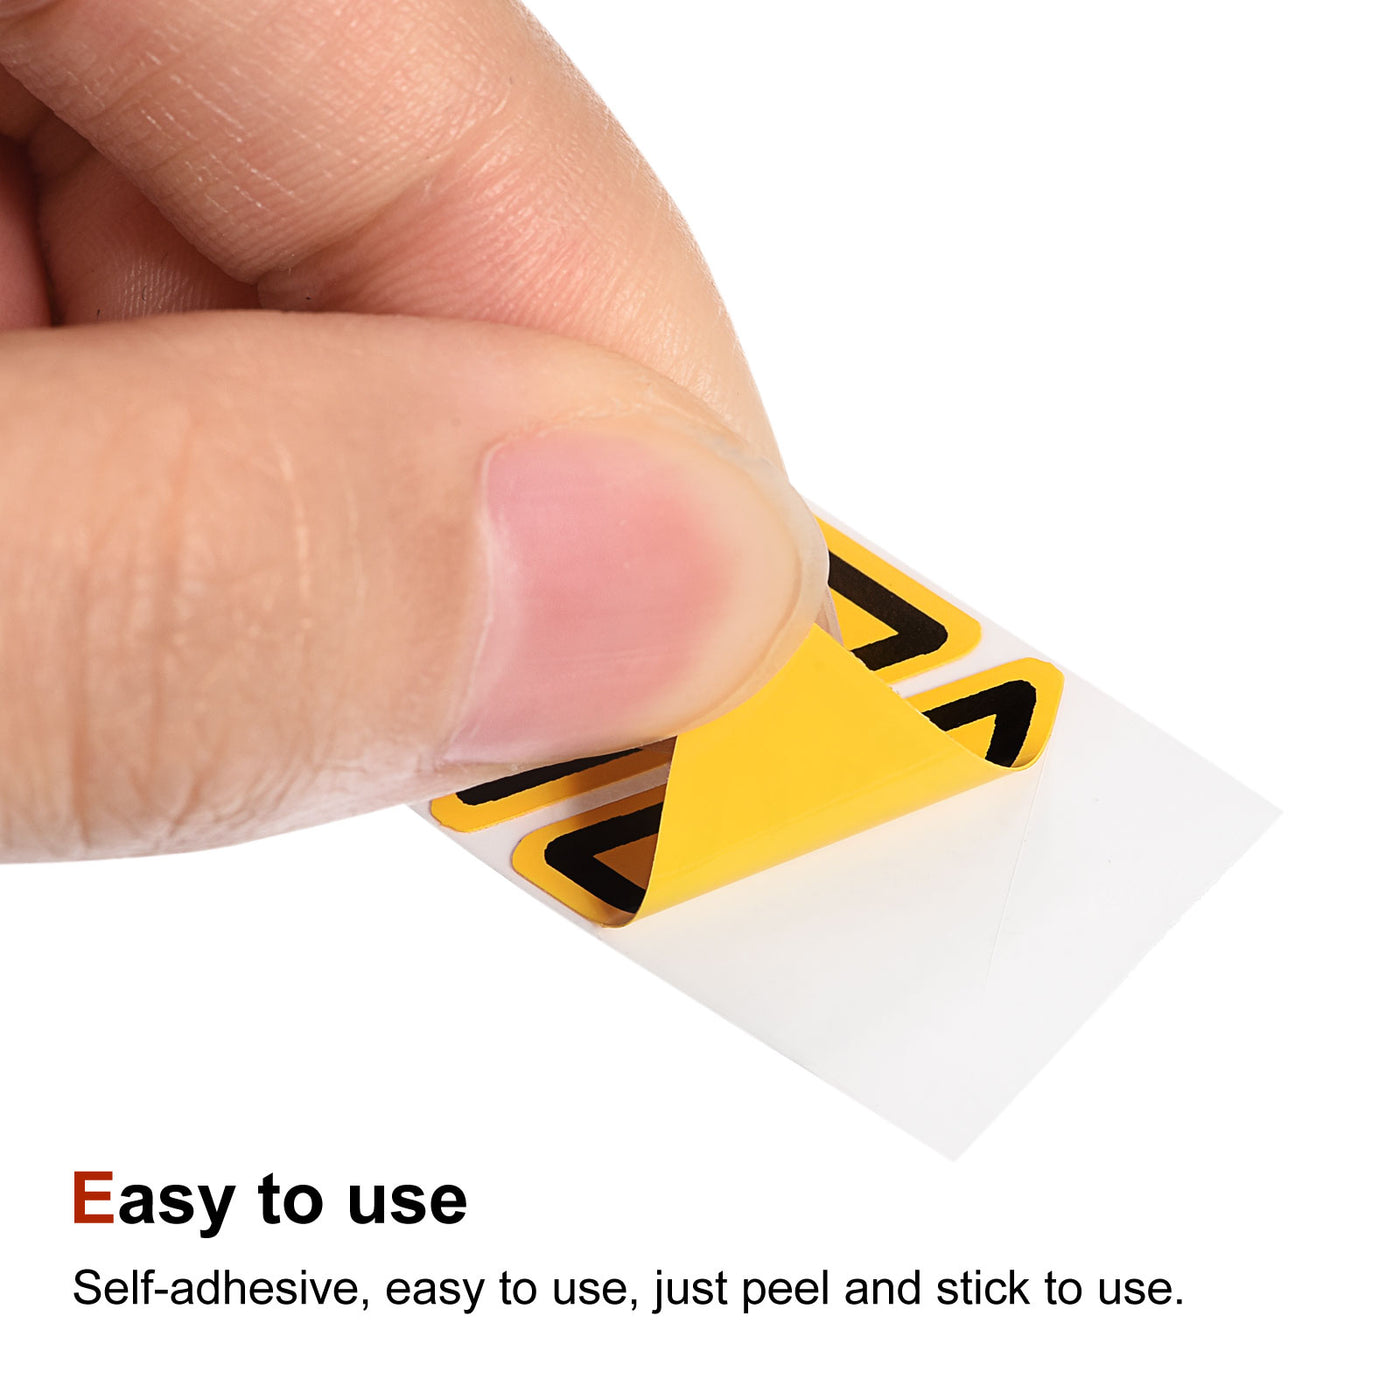 Harfington Triangle Safety Warning Sign Self Adhesive 20mm/0.78inch 10Pcs